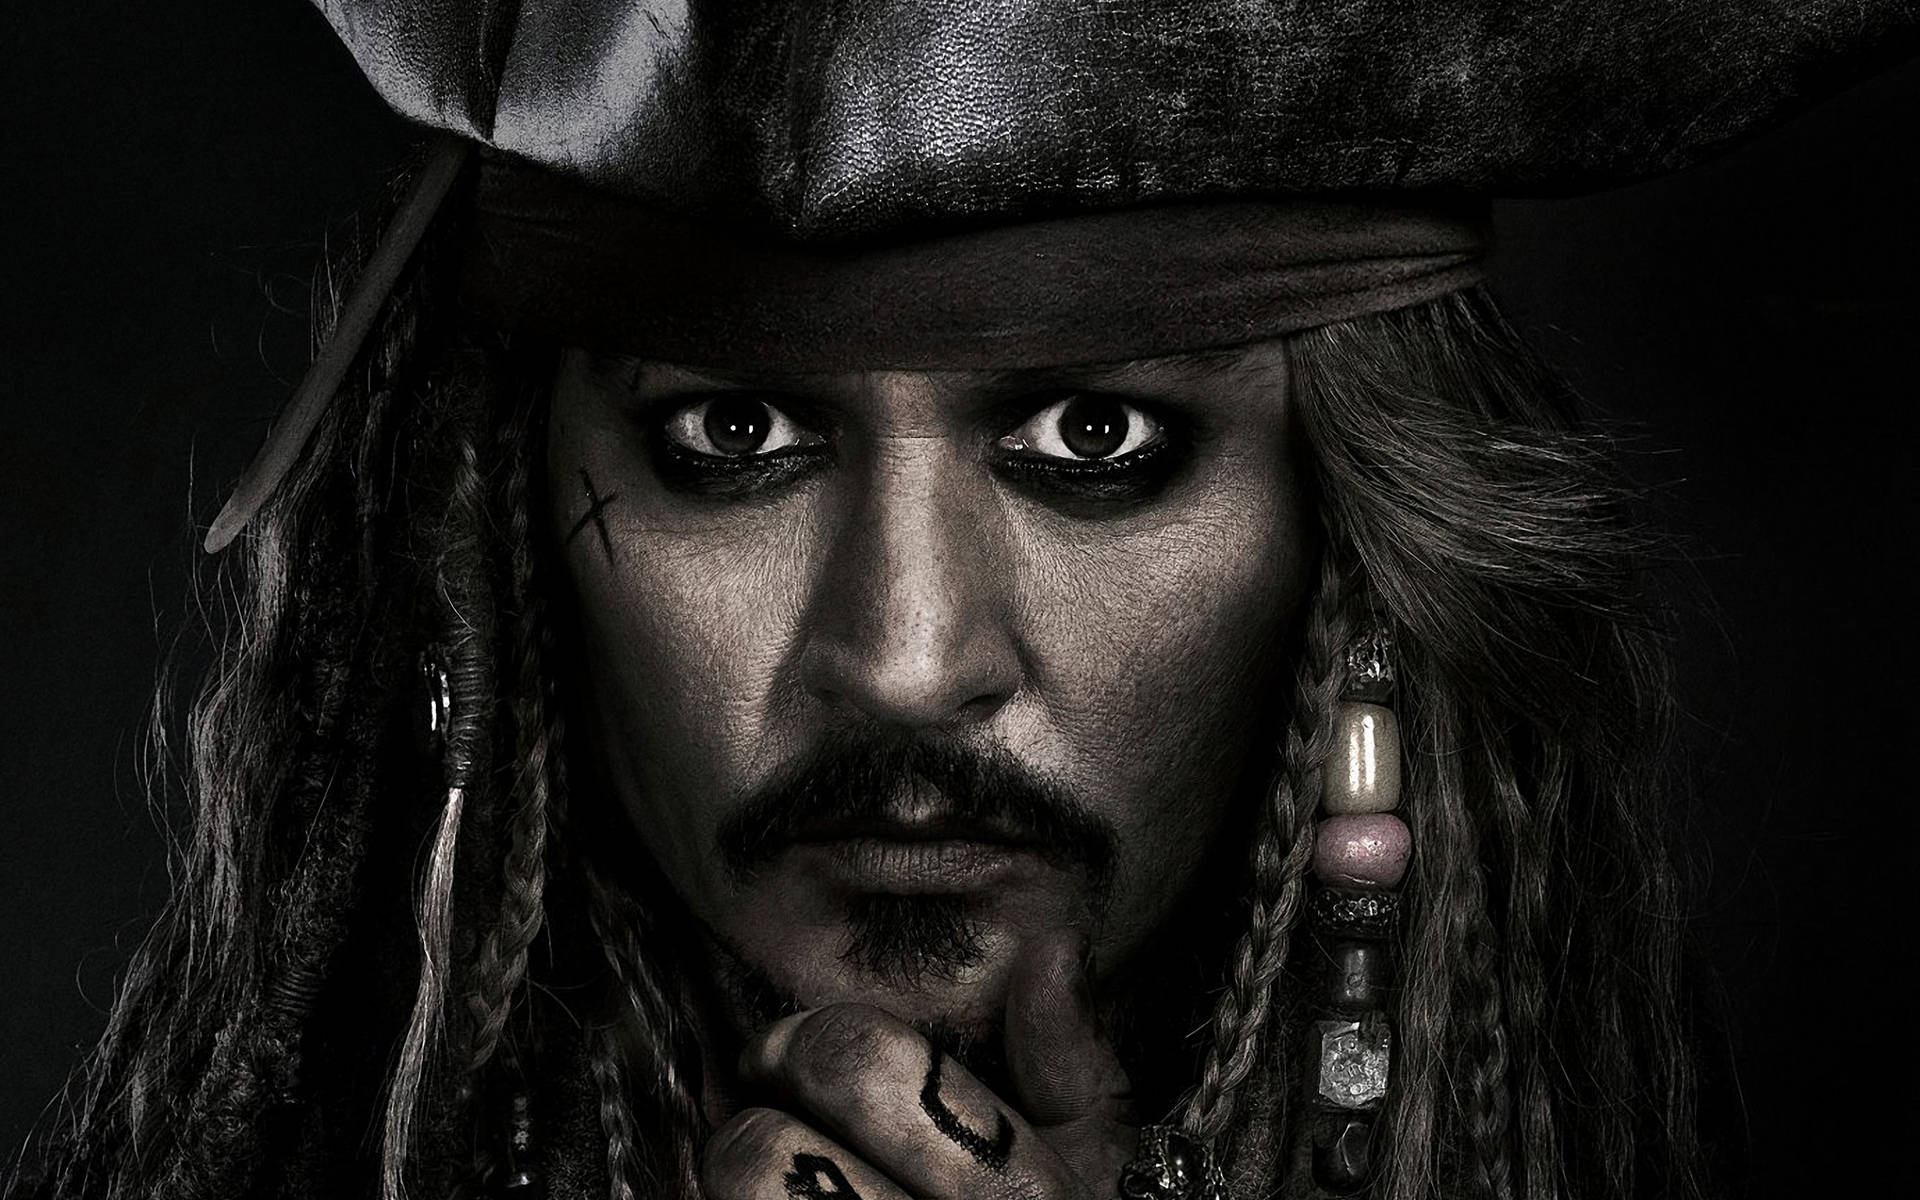 The Enigmatic Captain Jack Sparrow In Monochrome